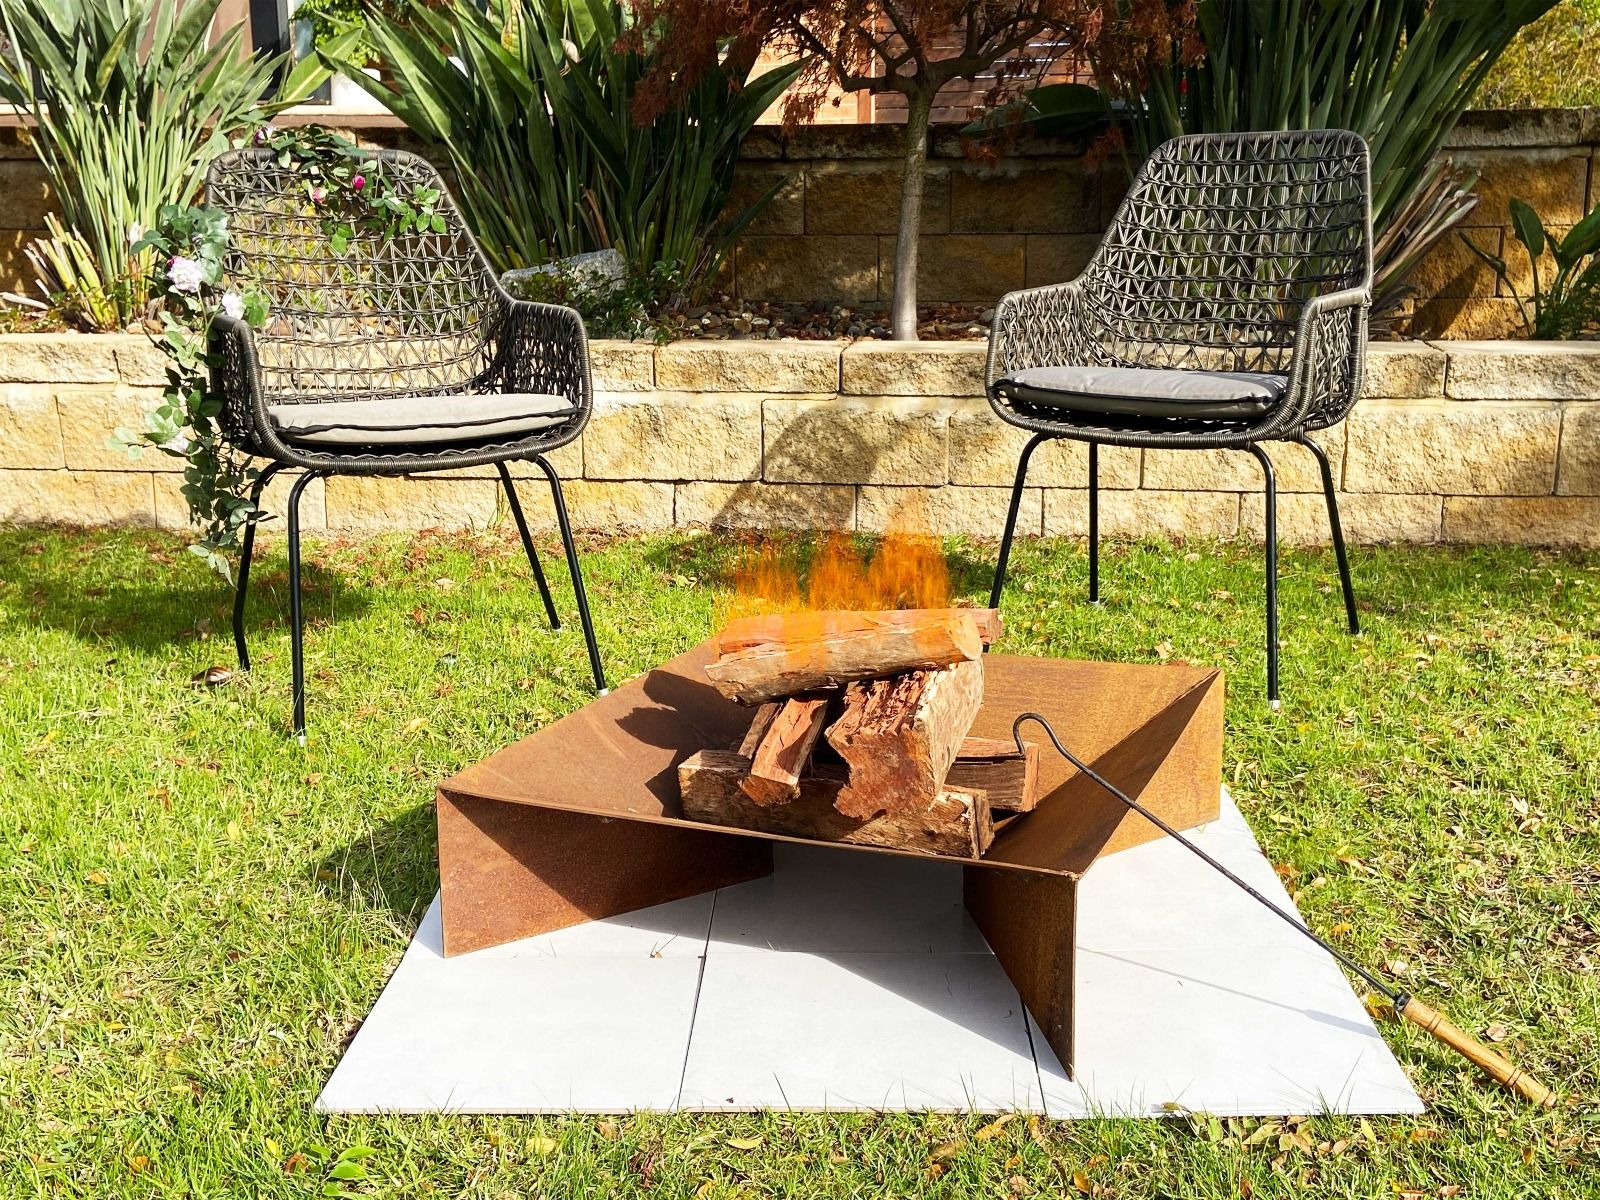 Steel Rustic Fire Pit with Ash Tray BBQ Heater Charcoal Wood Portable Cooking Outdoor